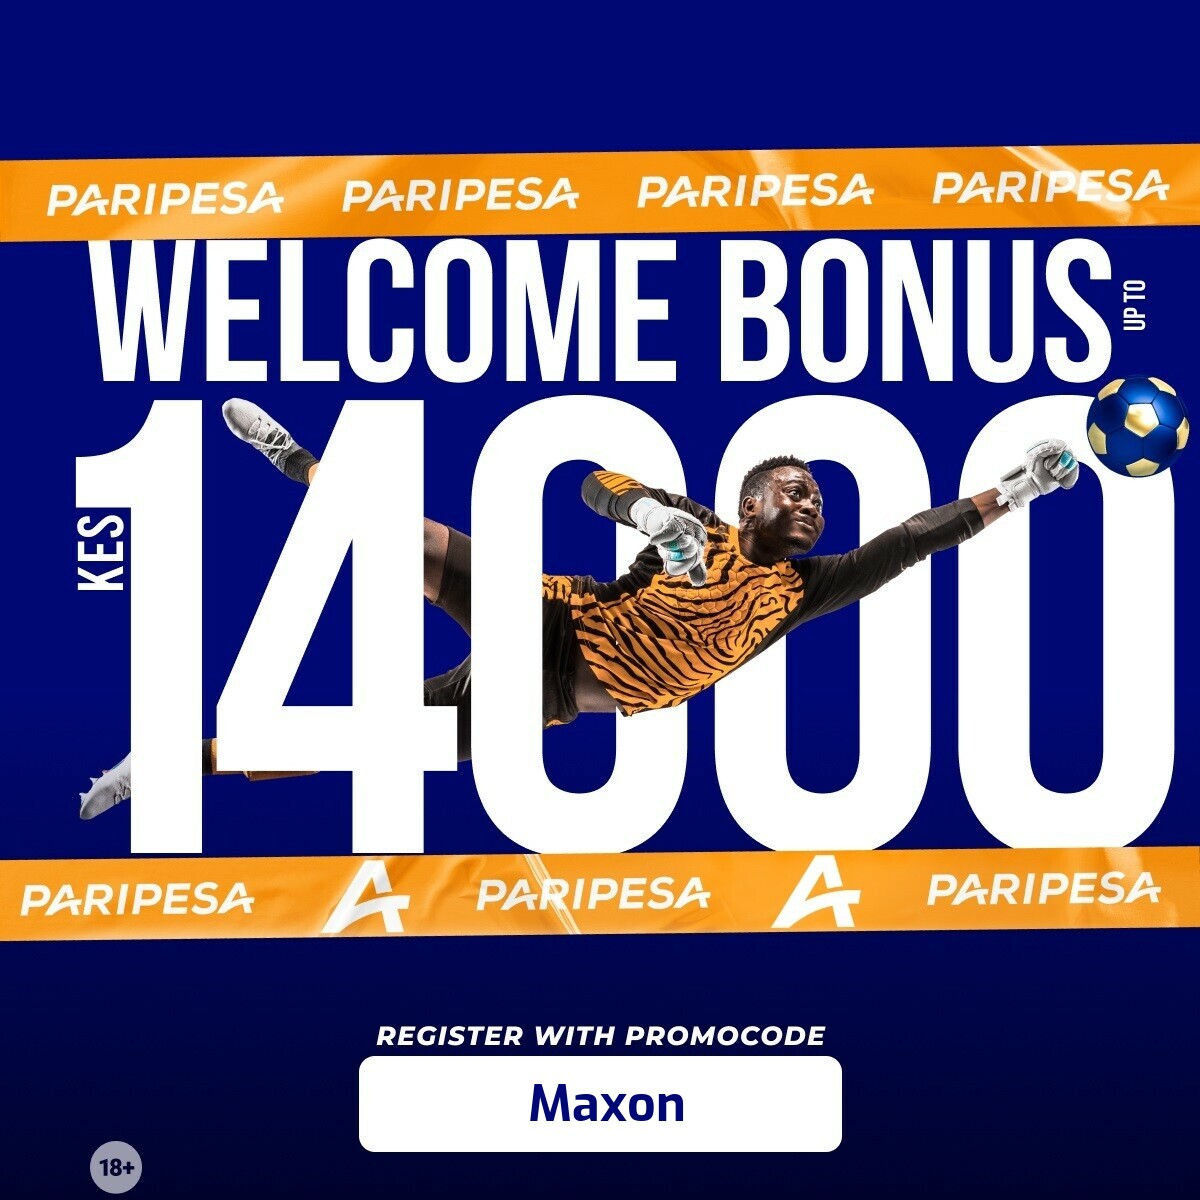 #Paripesa is the best site,place a bet and stand a chance to win💯🔥 🔴TAX-FREE 🔴Boosted odds 🔴100% welcome bonus Make your prediction below Join NOW & start winning🔥 Register 👉 bit.ly/3QIlmmG Promocode: MAXON